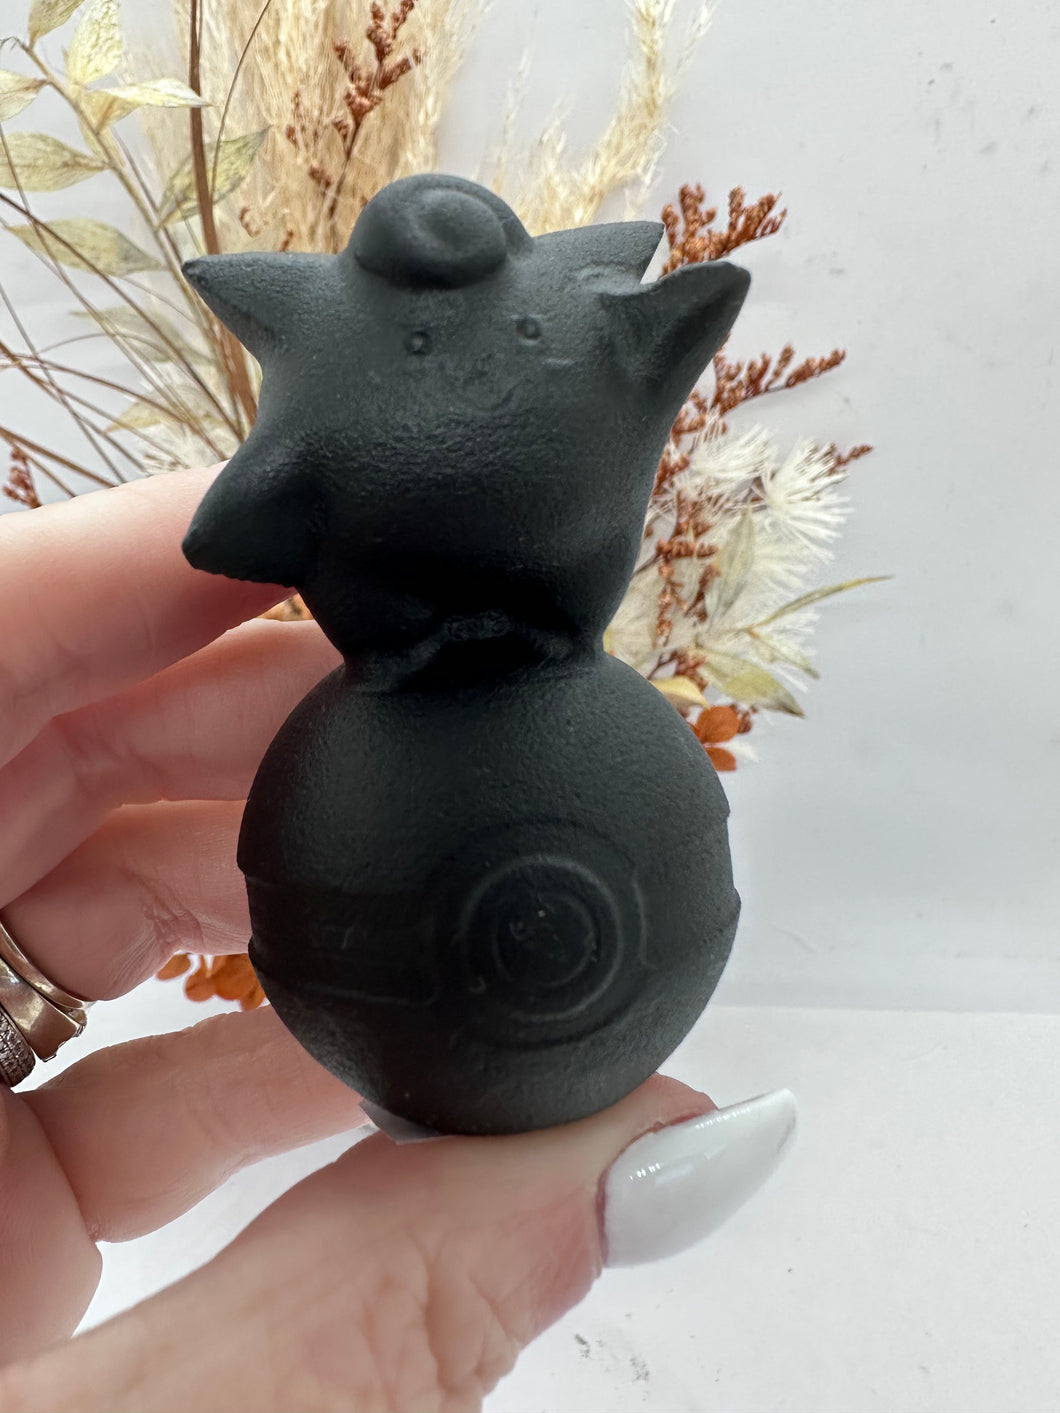 Blk Obsidian Poke Character on Ball ( perfectly imperfect)